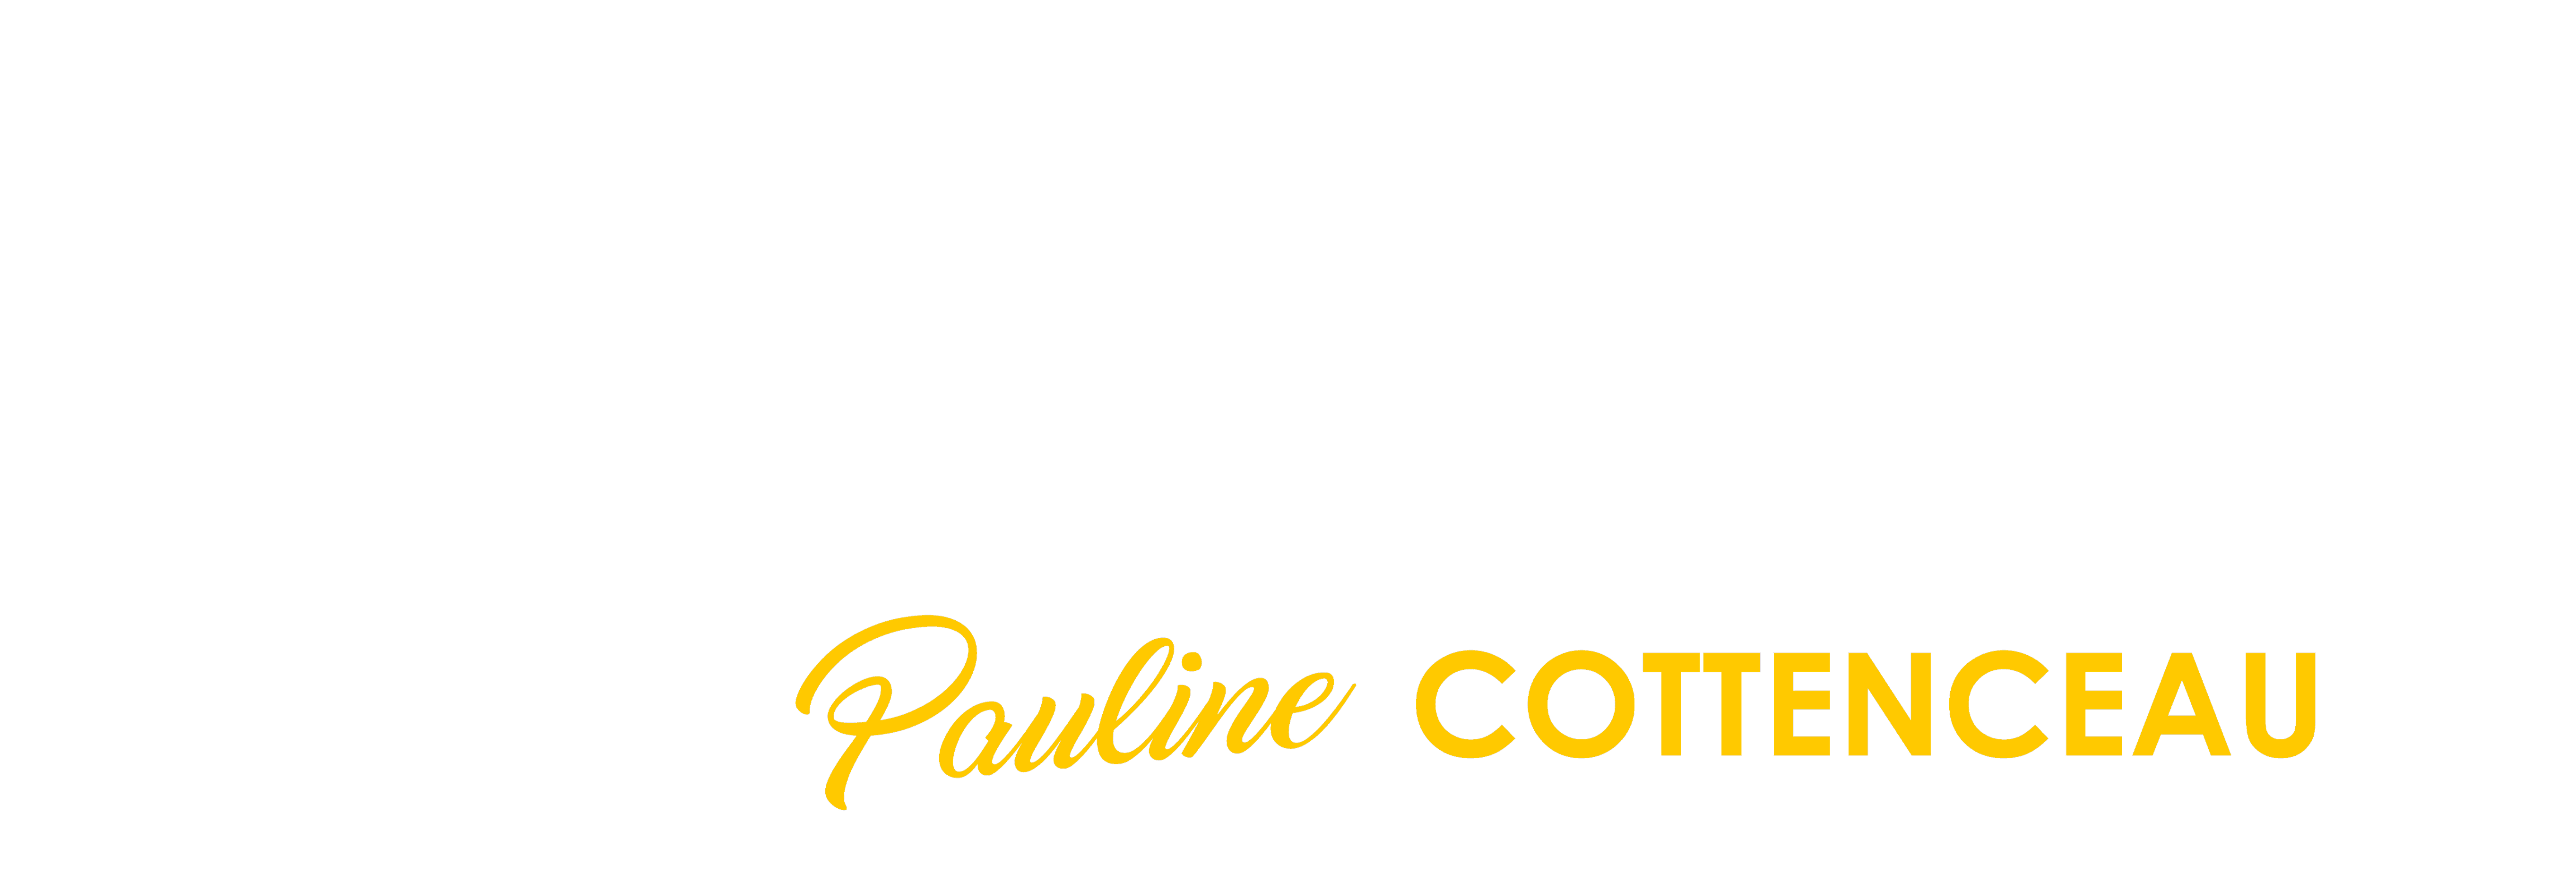 cottenceau immo